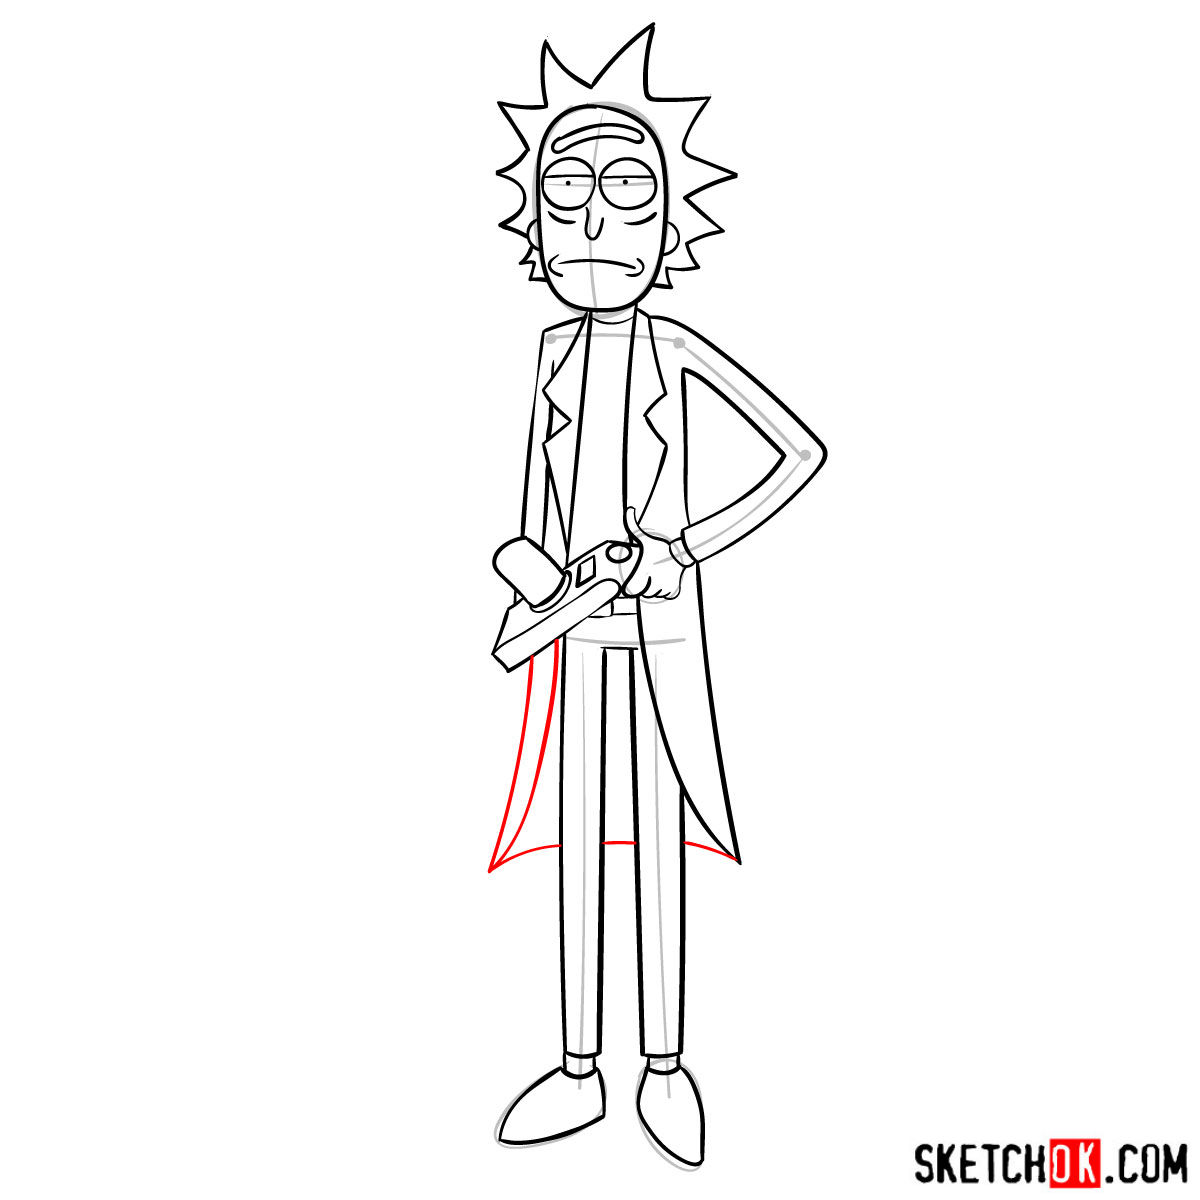 How to draw Rick Sanchez Sketchok easy drawing guides